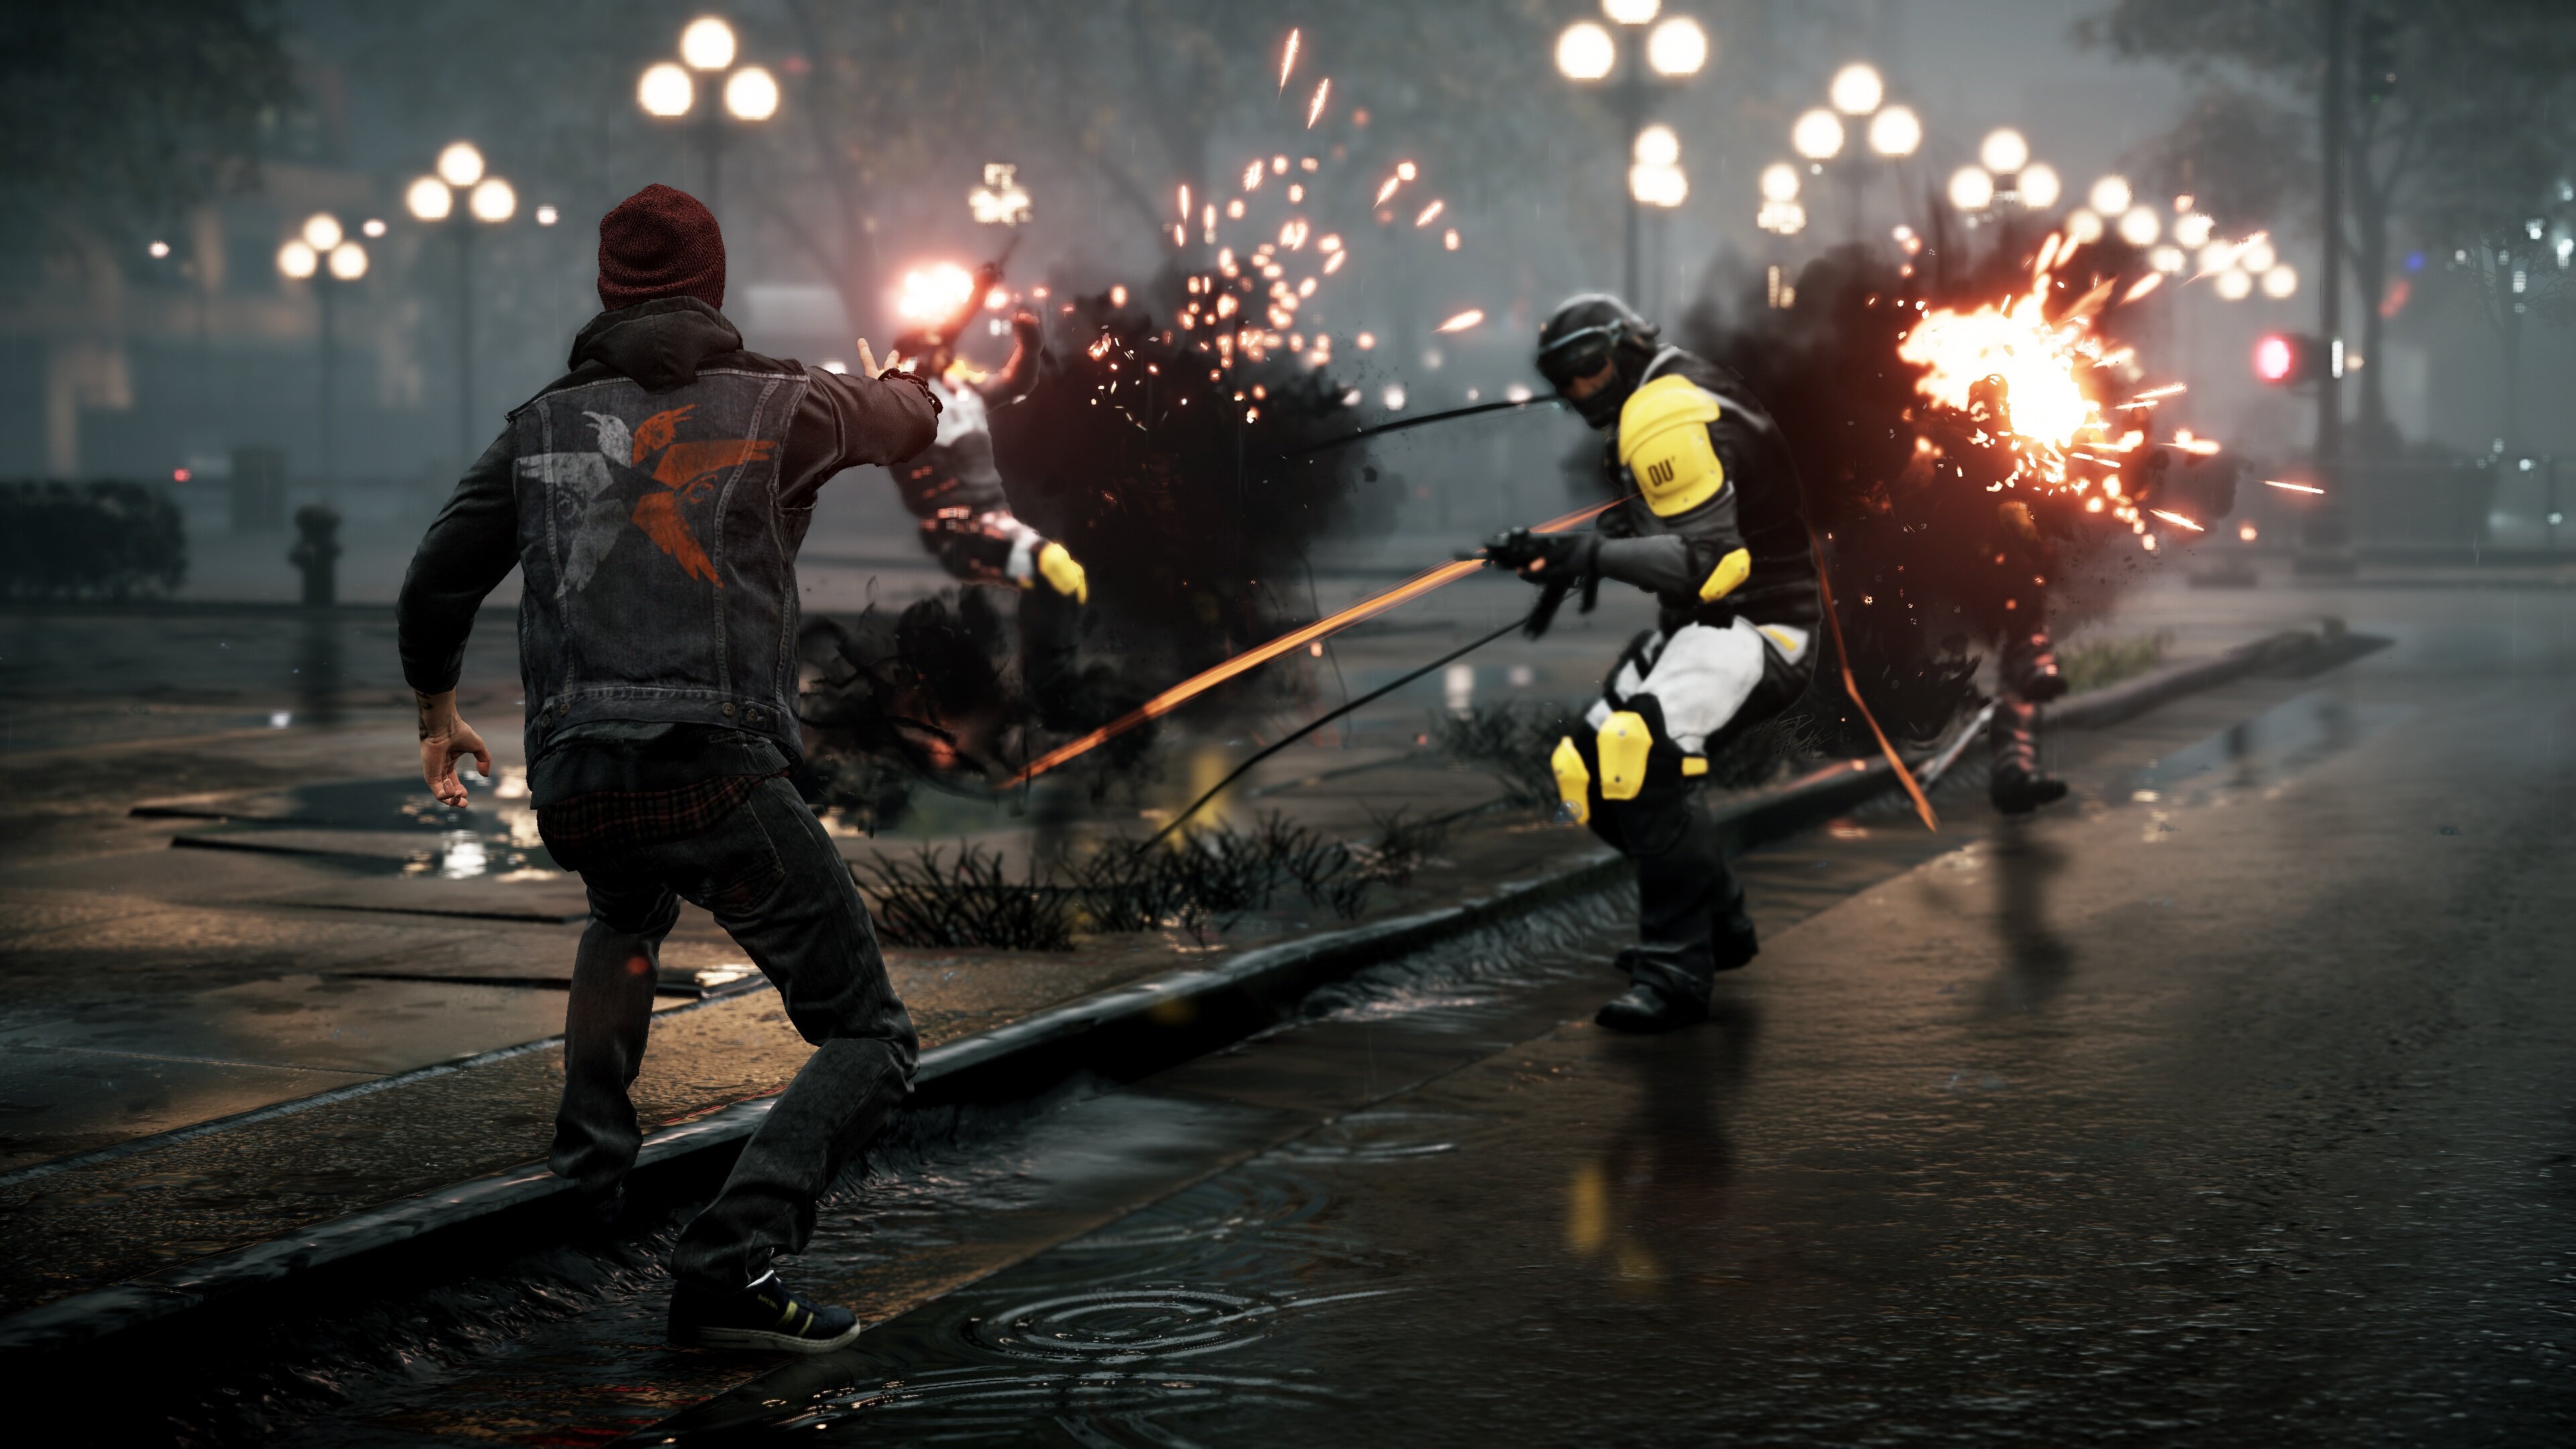 infamous second son wallpaper hd,firefighter,emergency service,event,fire department,emergency